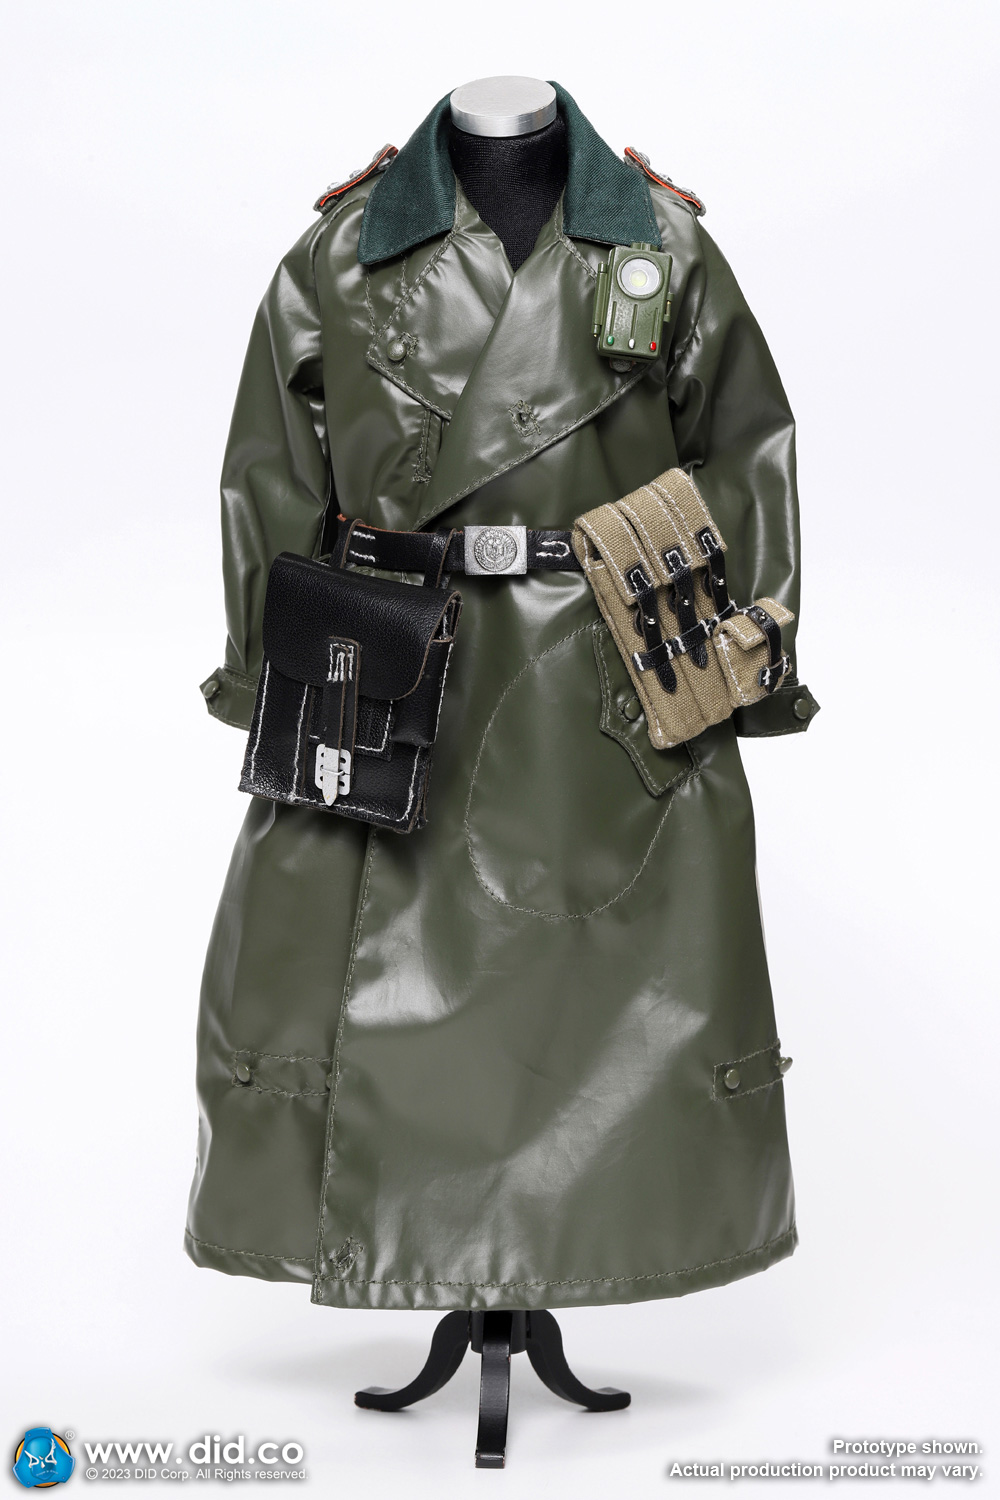 NEW PRODUCT: DiD: D80166 WWII German Military Policeman – Richard 1/6 scale action figure 4412